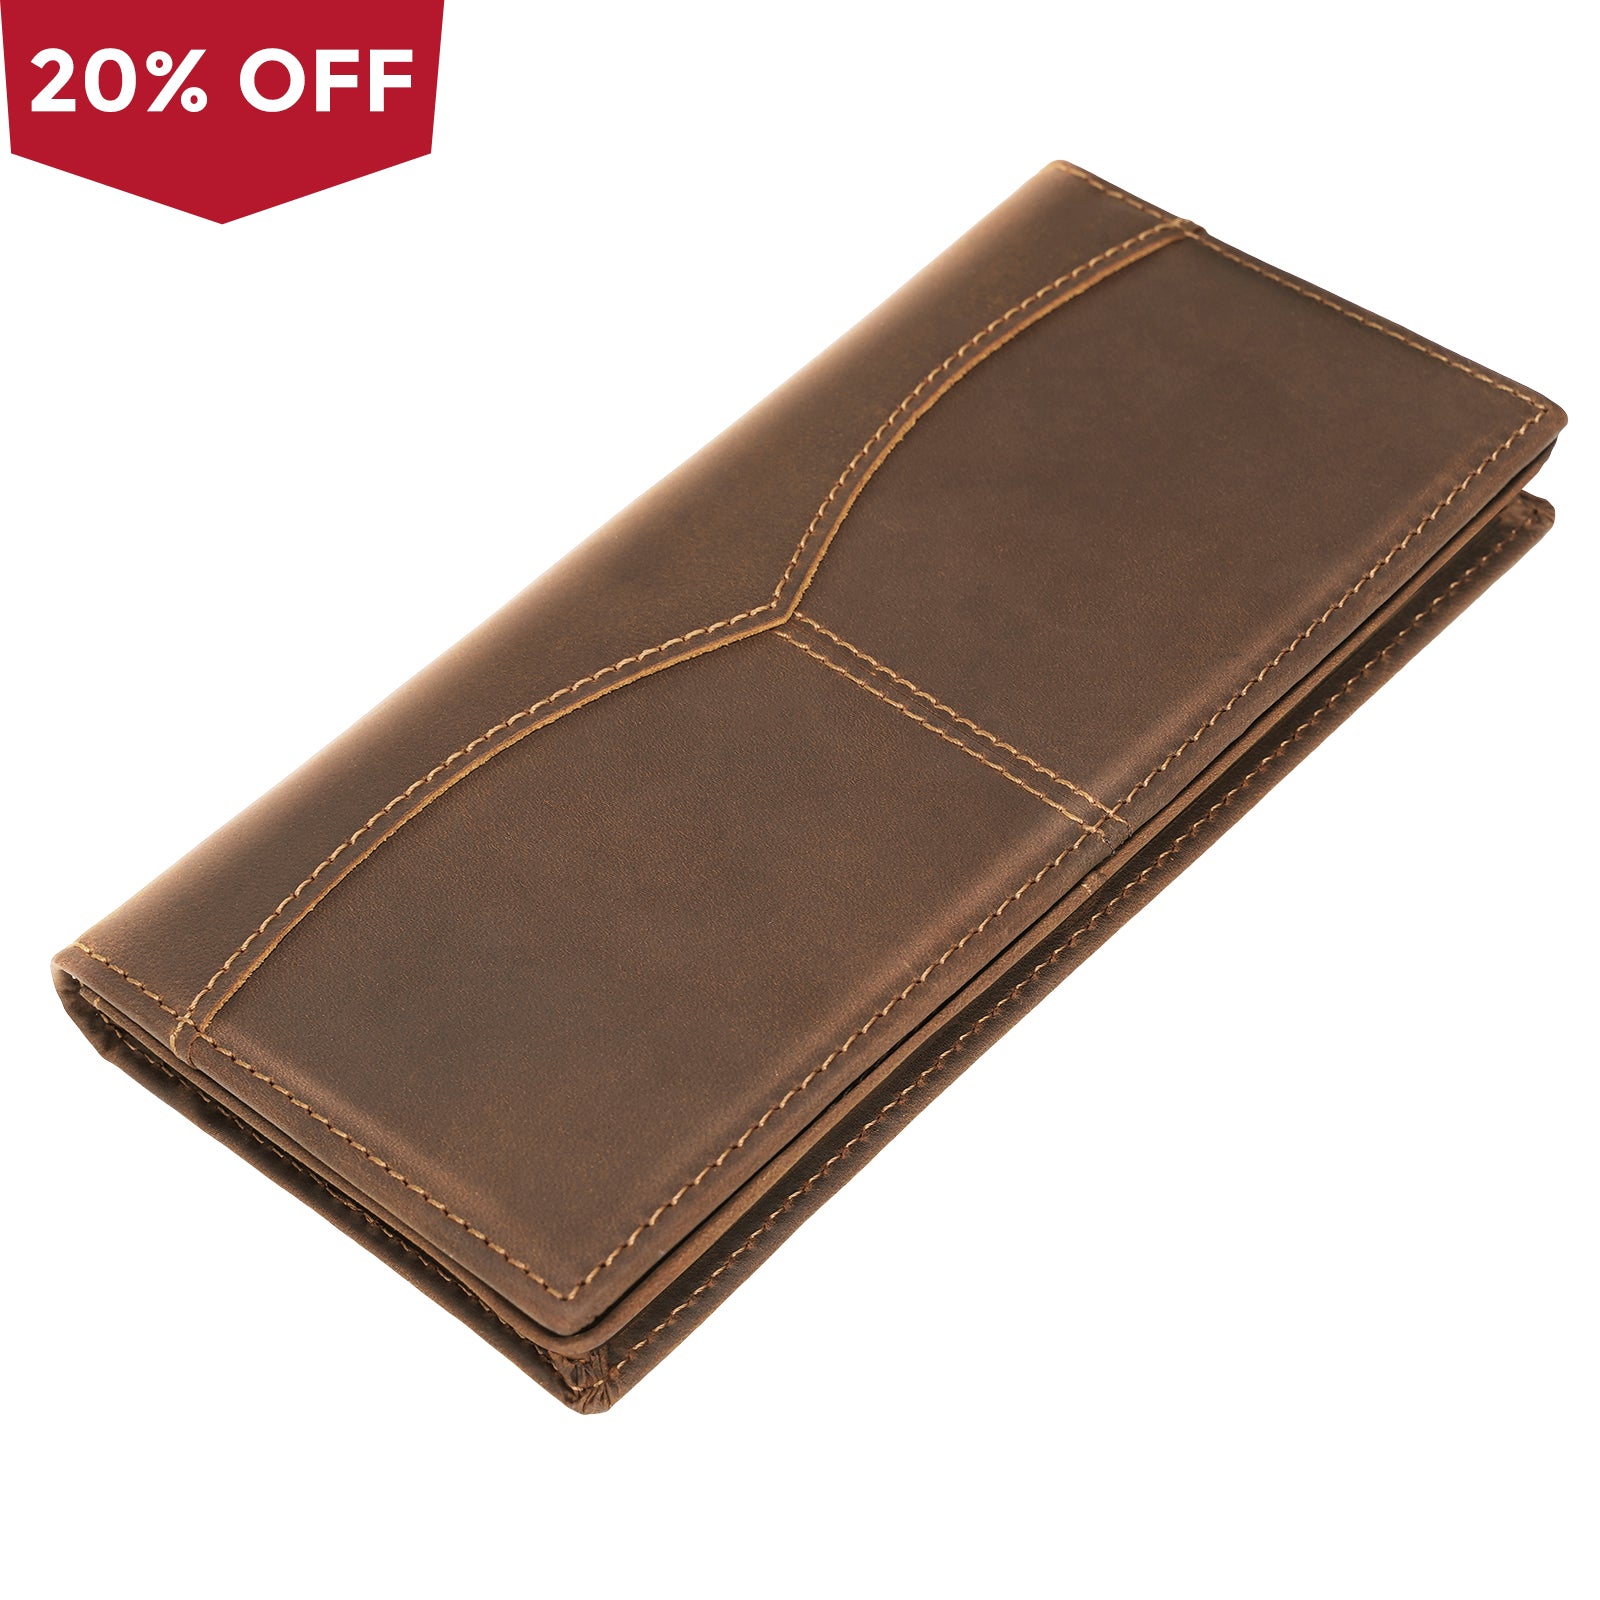 The Bifold - Top Grain Brown & Black Leather Wallet – The Real Leather  Company